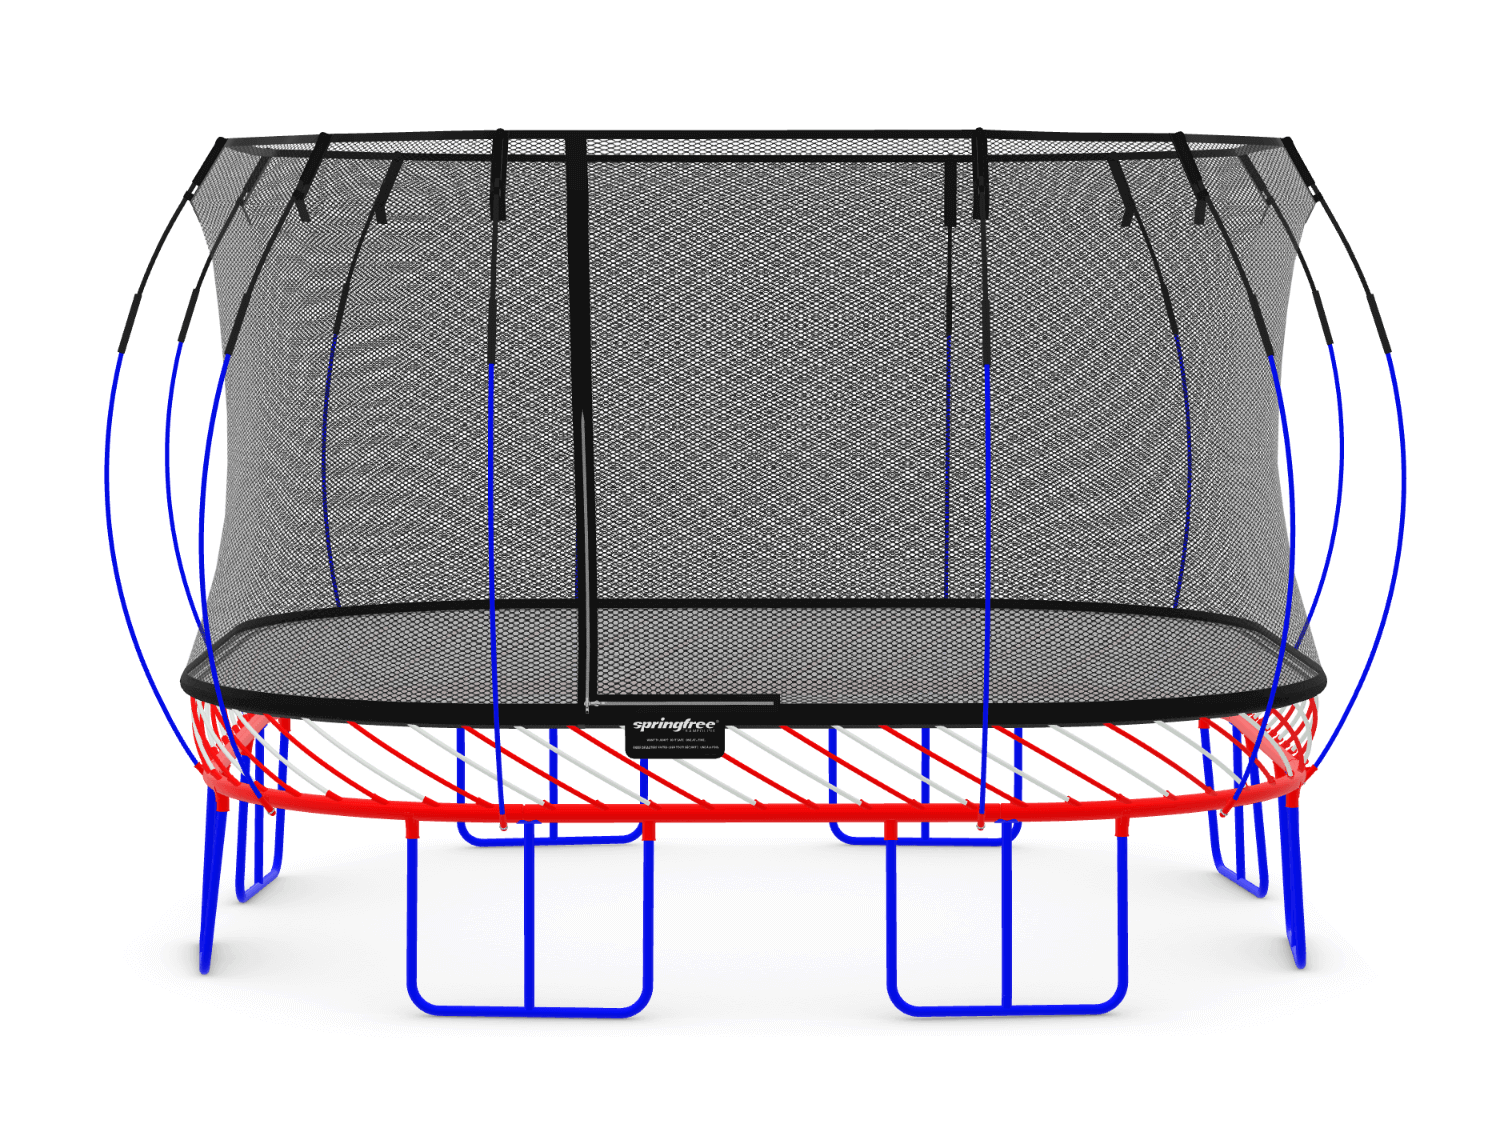 A Springfree custom trampoline designed with blue and red colors